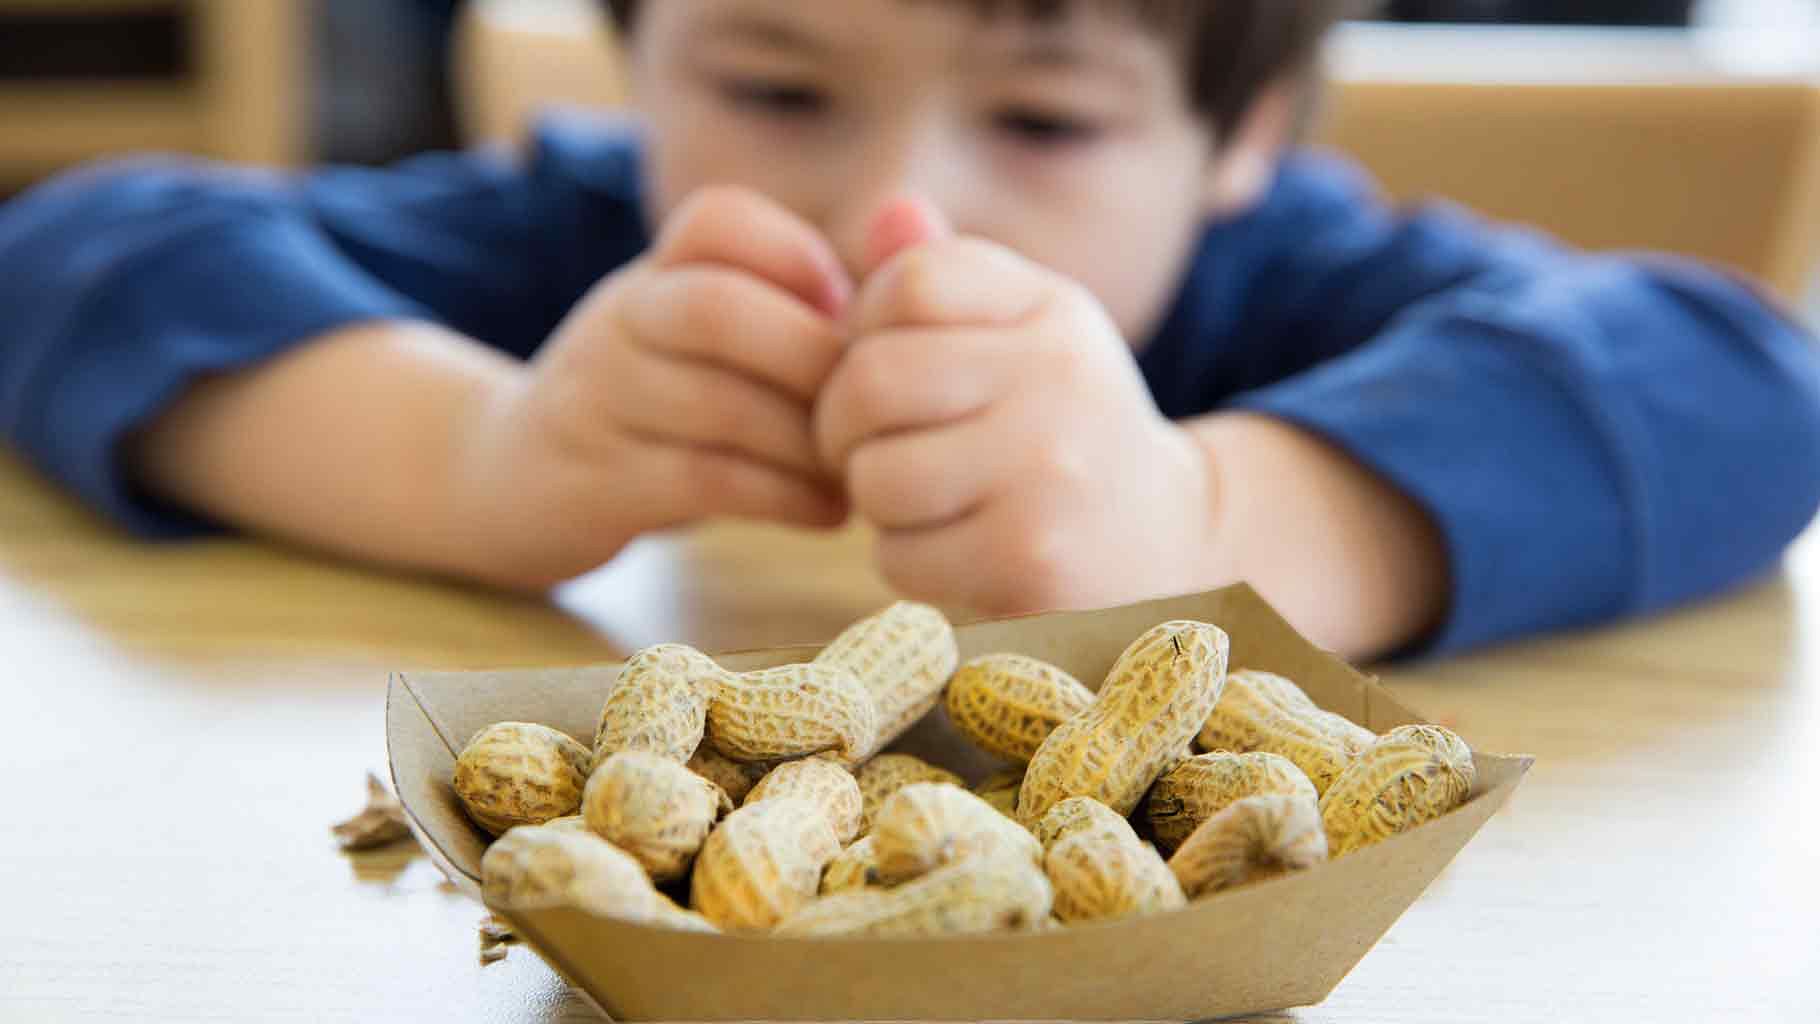 Research found that feeding peanuts to young children as little as three-months-old brings down their risk of developing peanut allergies (Photo: iStock)